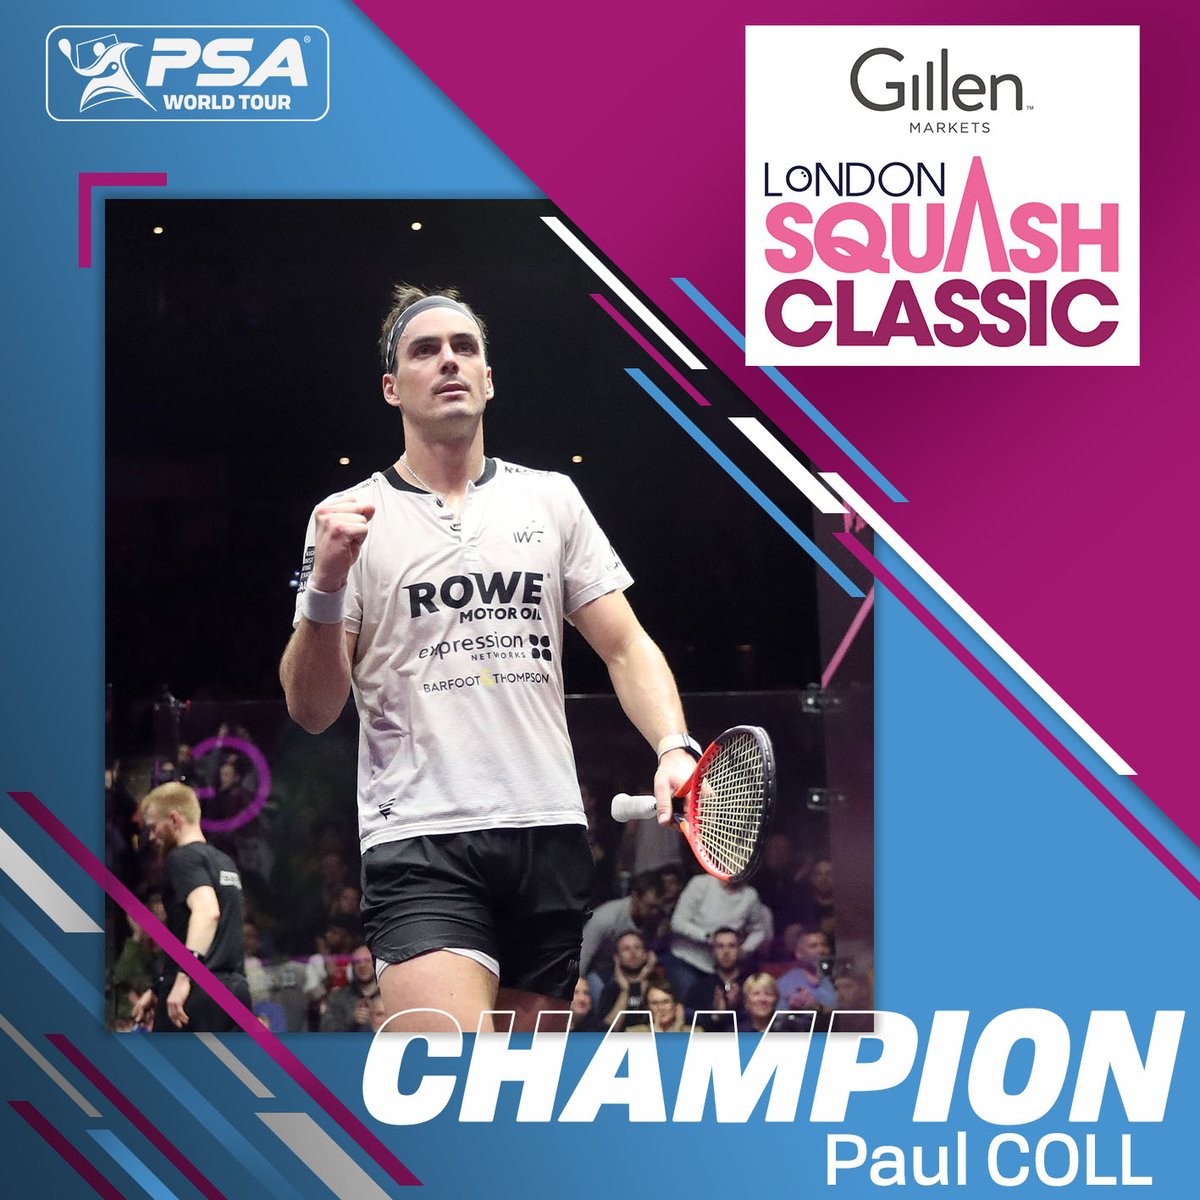 Back-to-back titles for @paulcollsquash 🏆🏆 A third straight win over Asal gives Coll his 2️⃣5️⃣th tour title 🔥 🇳🇿 [1] @paulcollsquash beats [2] @mostafasal_ 🇪🇬 3-1: 11-8, 11-13, 11-7, 8-1 retired (66m) 📝 Report: bit.ly/43FQRC8 #LondonClassic